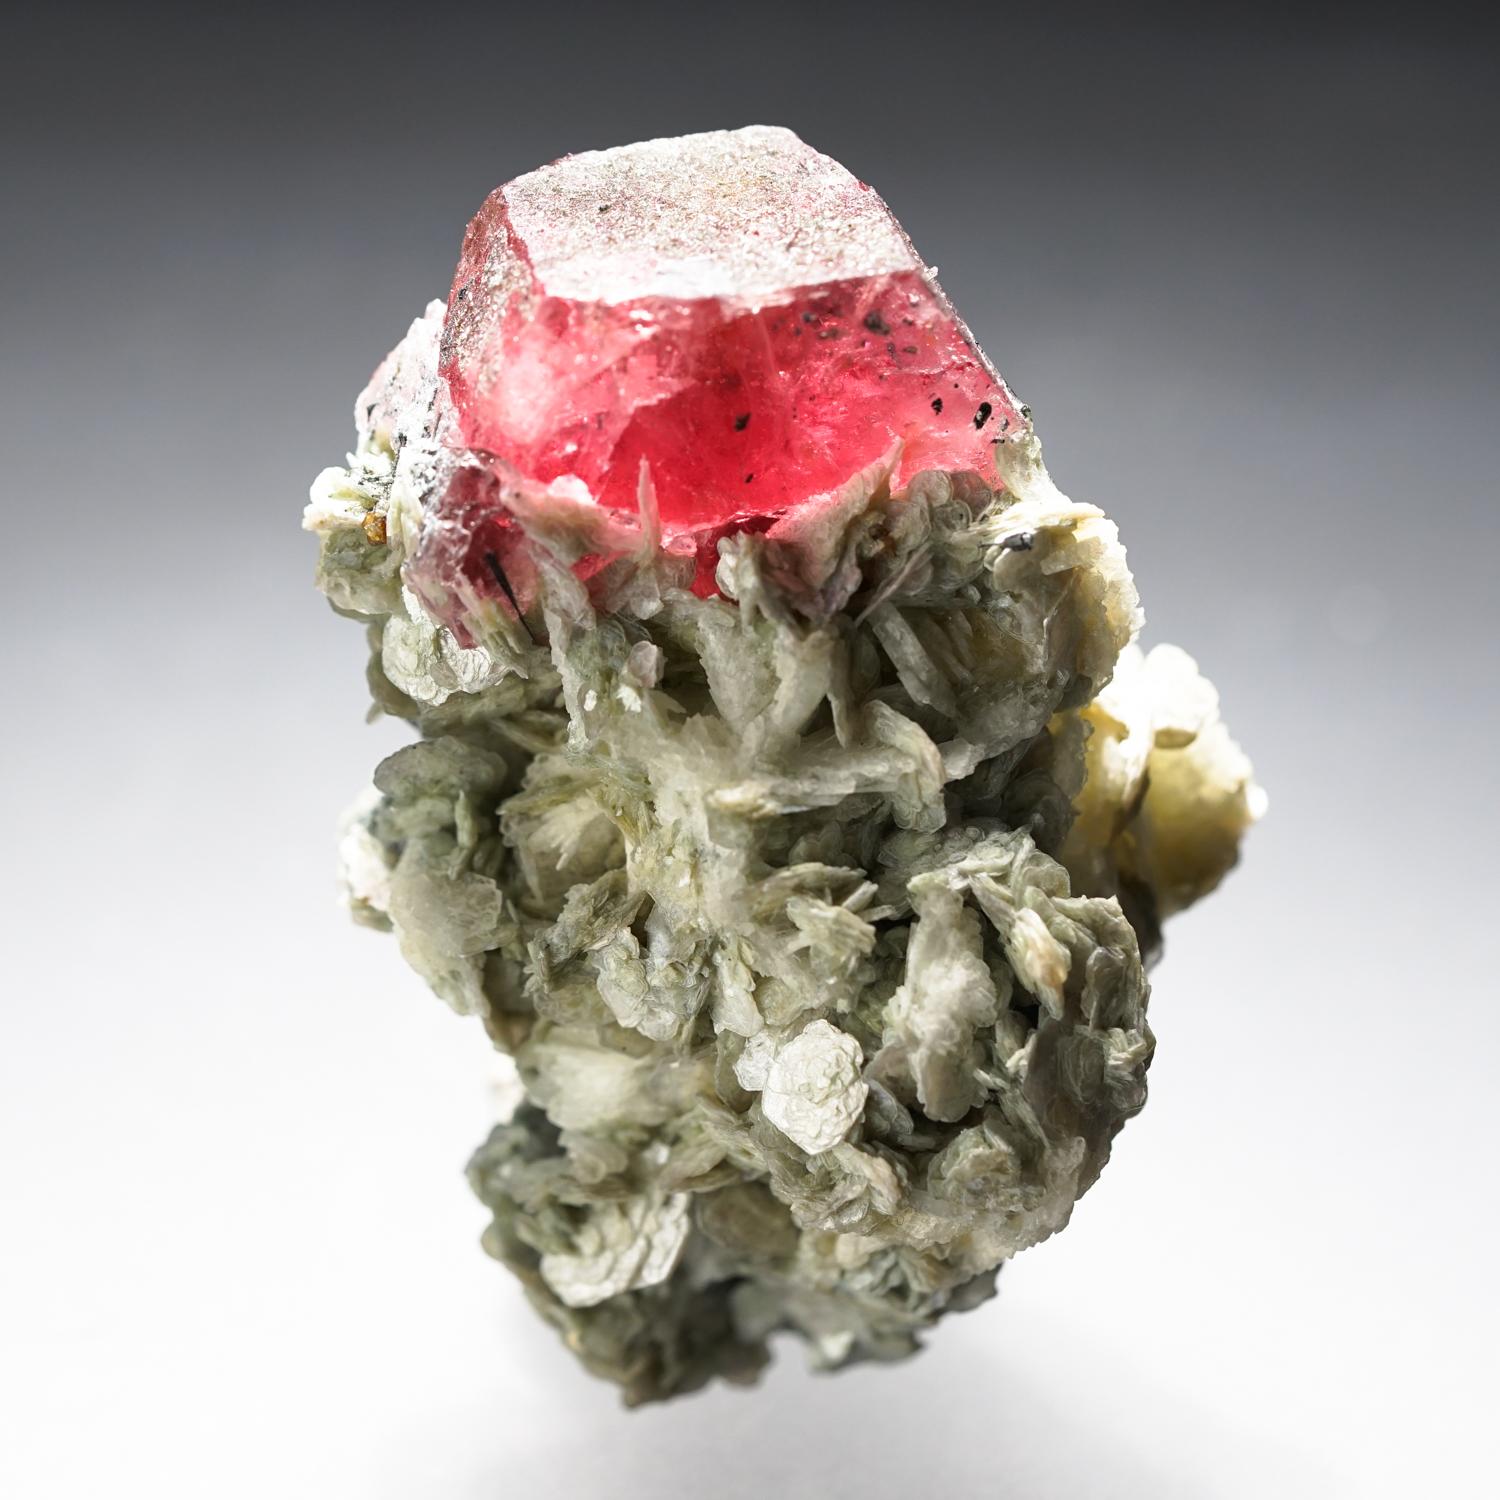 From Hunza Valley, Gilgit-Baltistan, Pakistan.

Transparent to translucent deep pink hexagonal fluorapatite crystal on an intergrown cluster of muscovite. The fluorapatite crystas has lustrous modified basal pinacoid faces and glassy prism